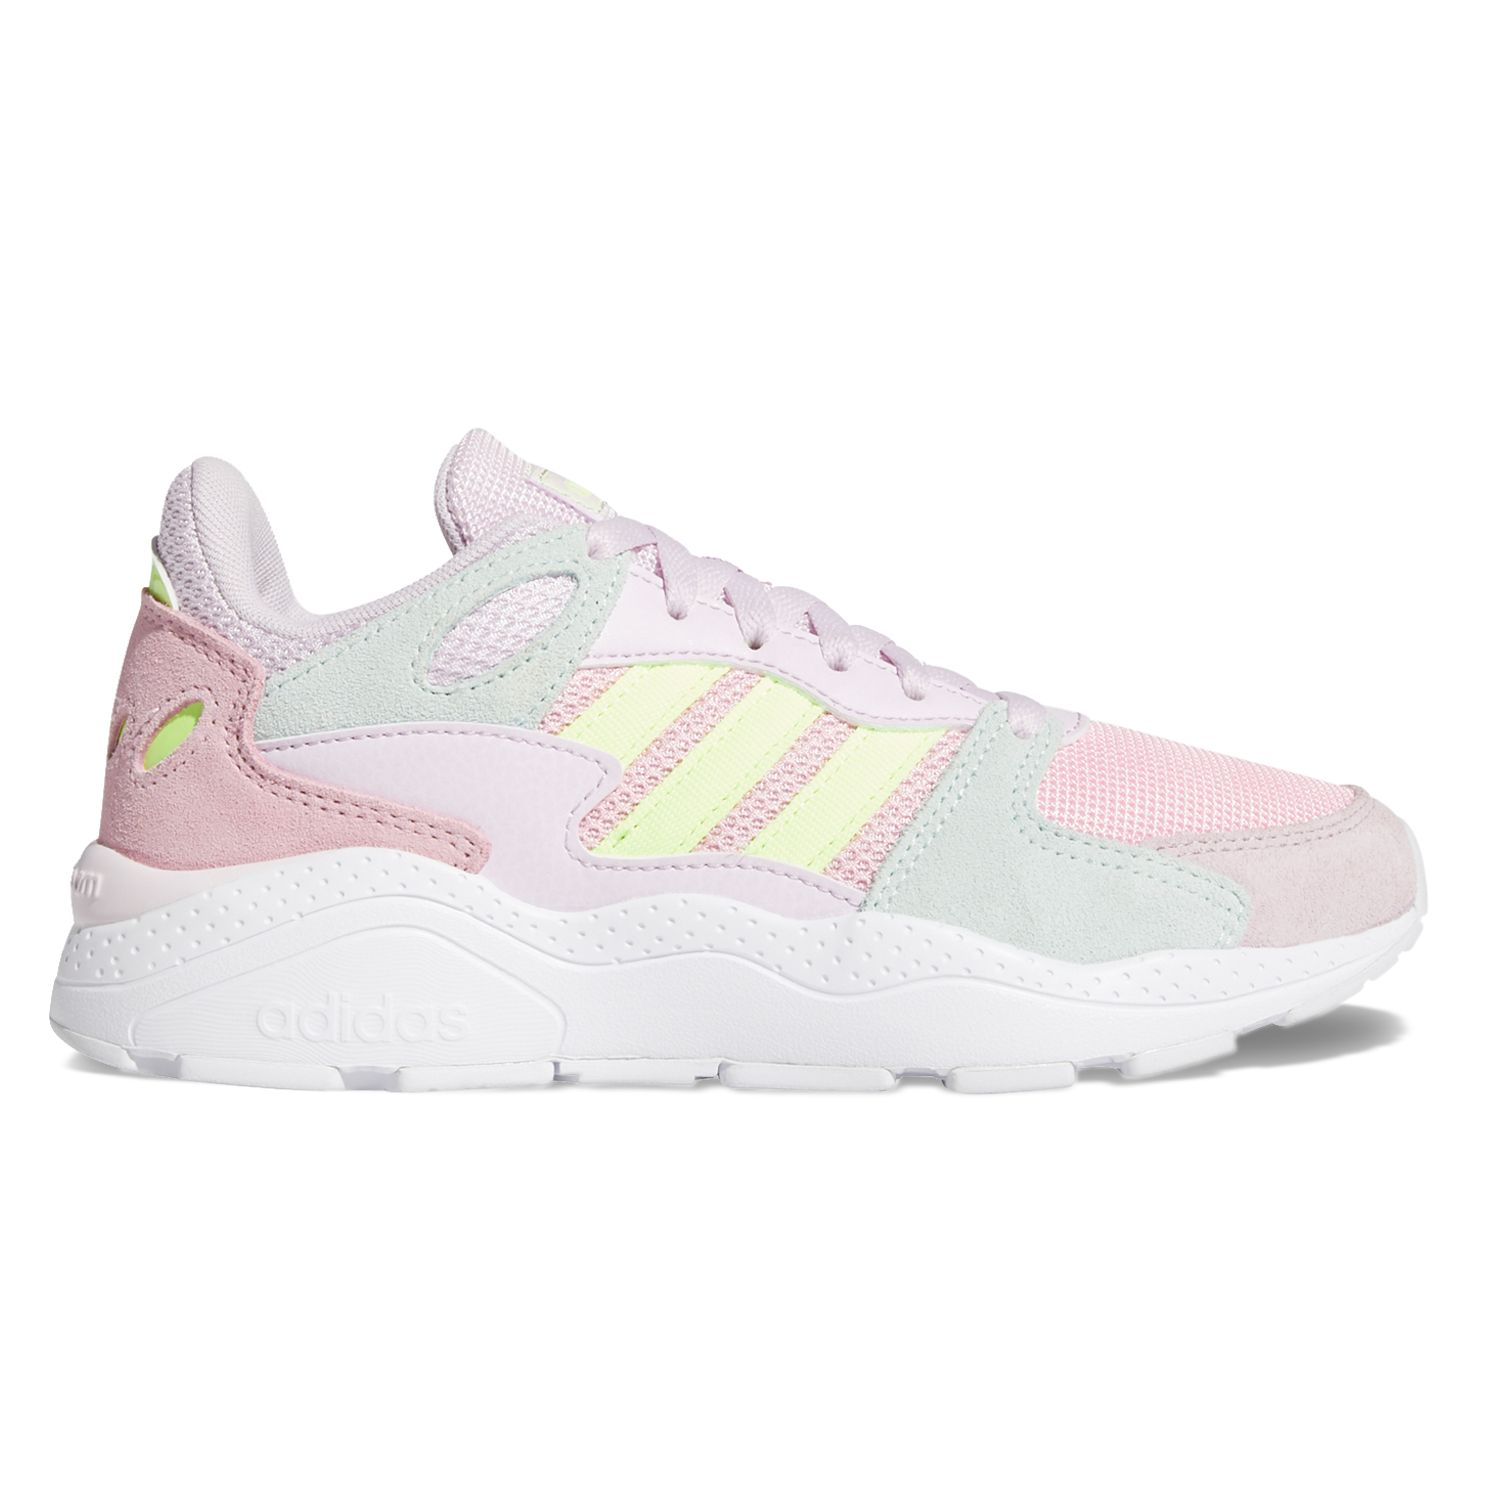 adidas Chaos Girls' Sneakers